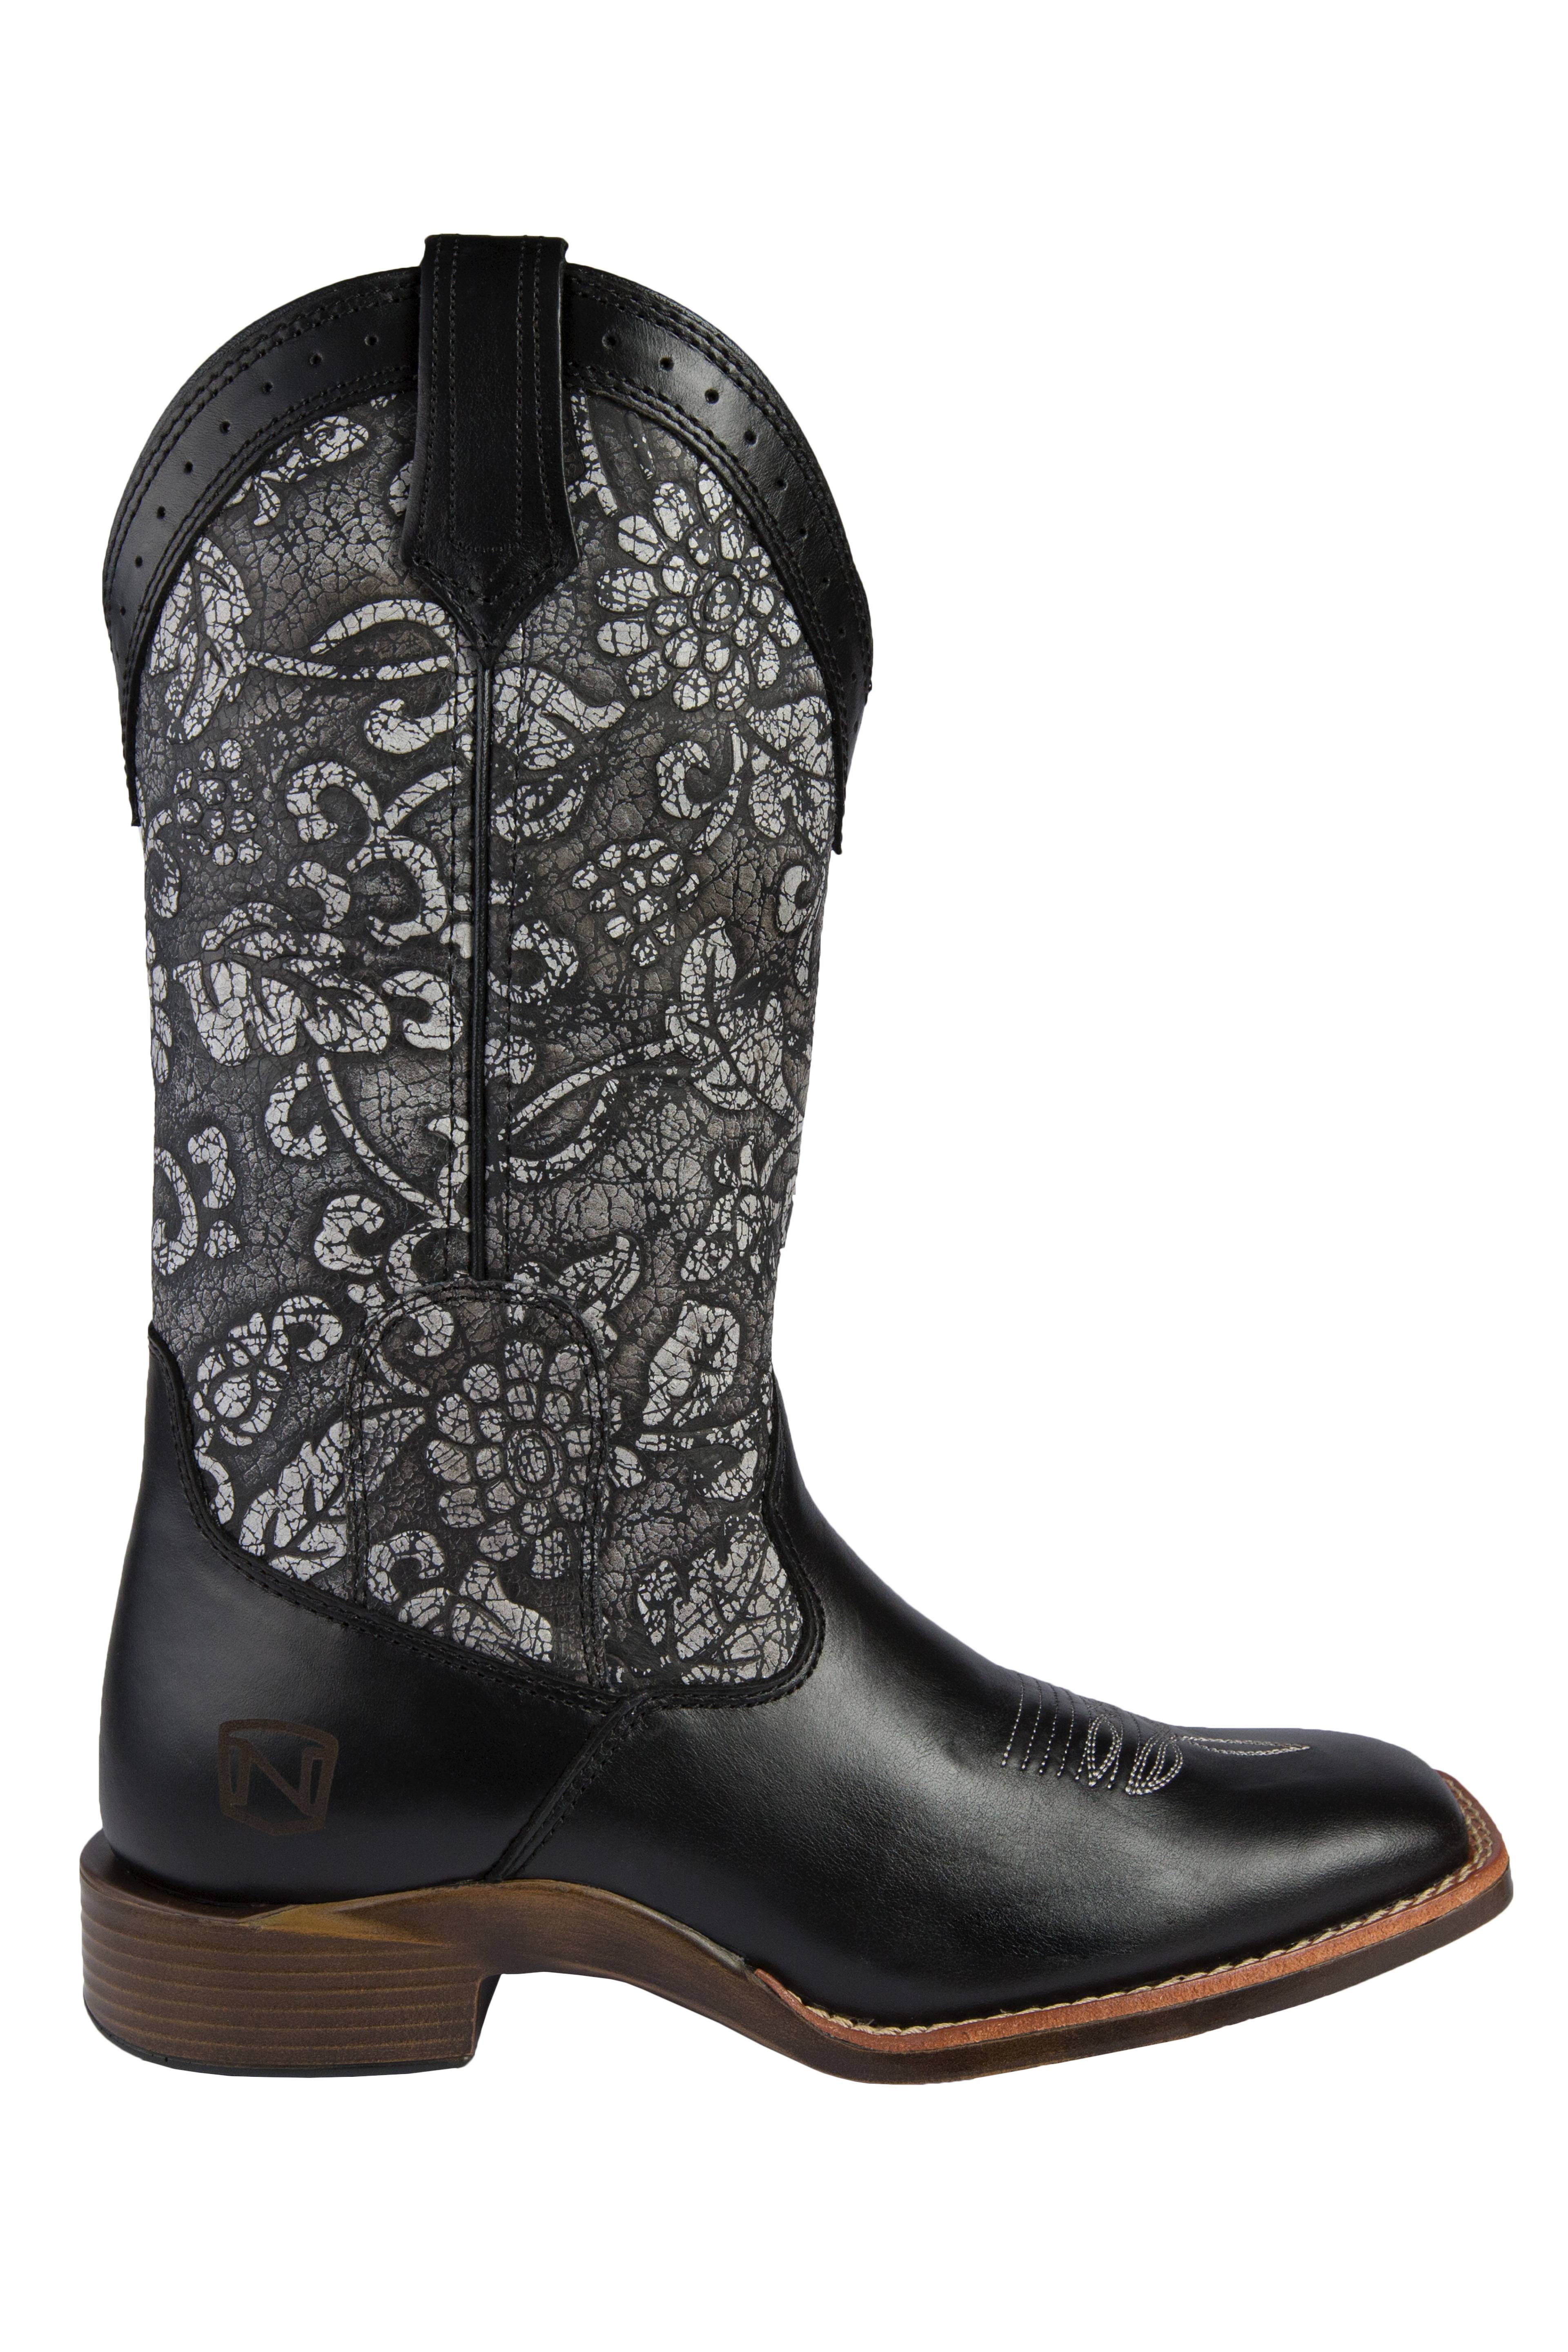 Noble Outfitters All Around Floral Square Toe Boot-Ladies